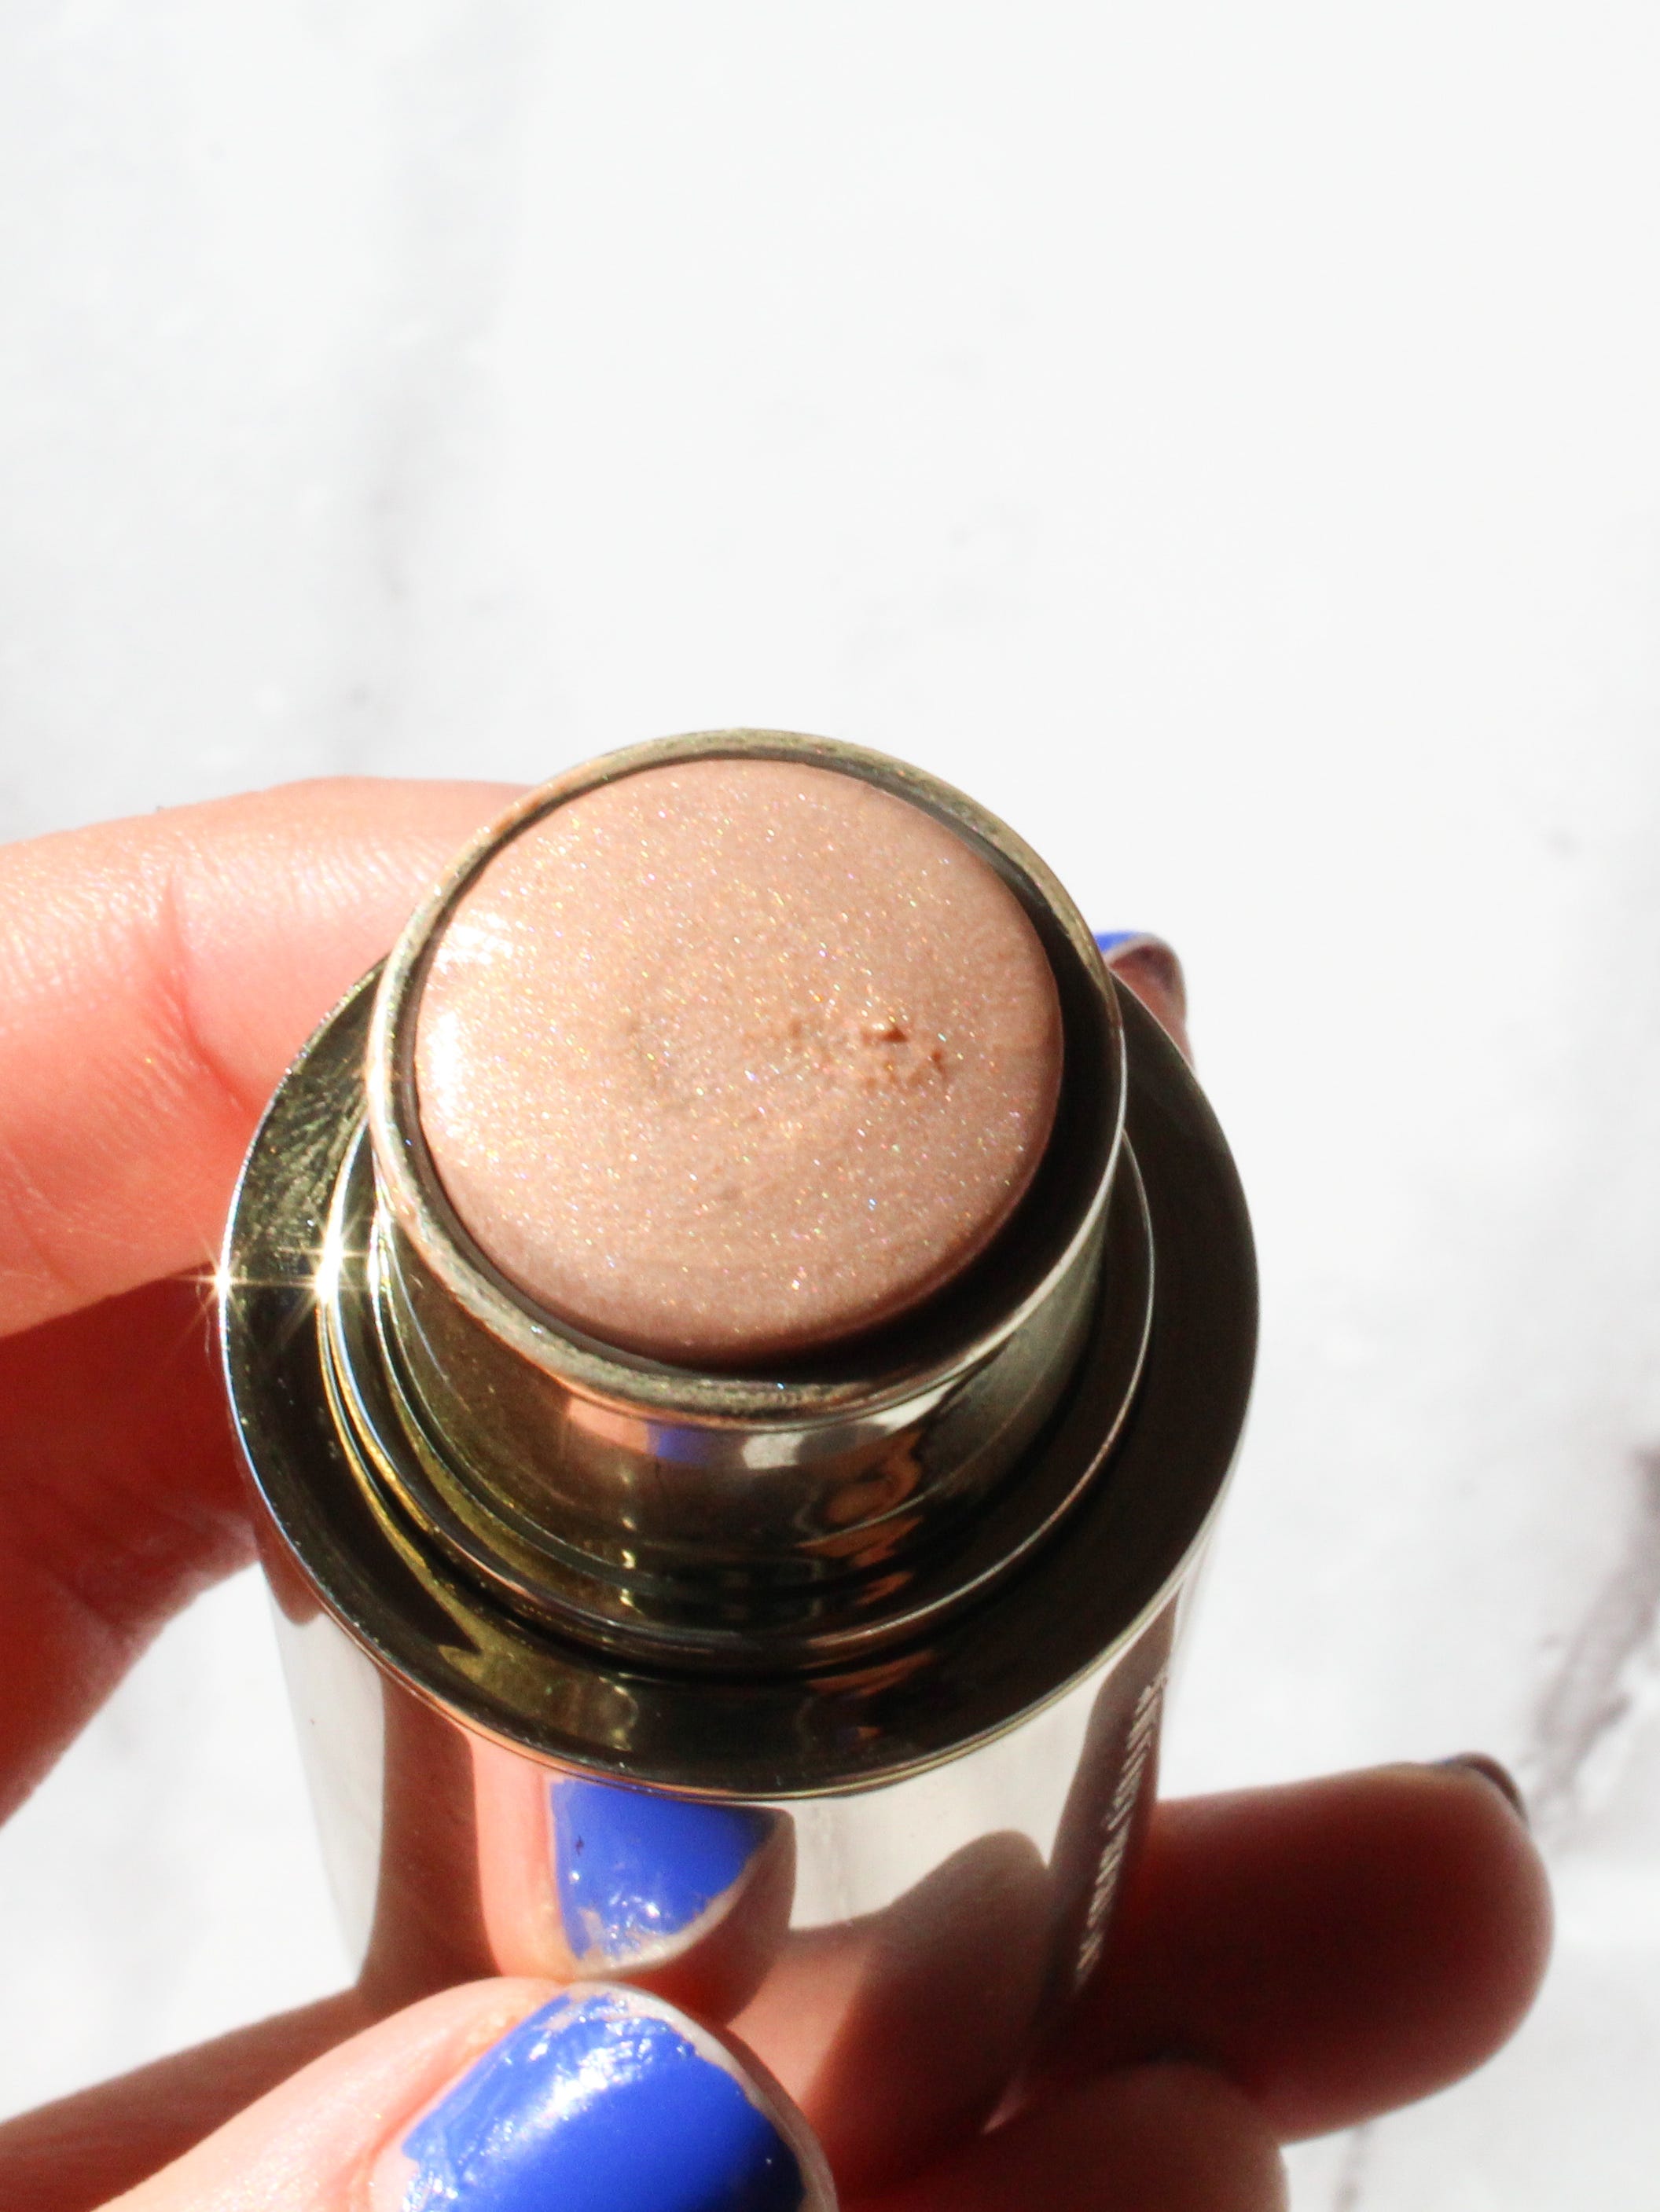 6 glowy highlighter balms to enhance your natural ~dew~